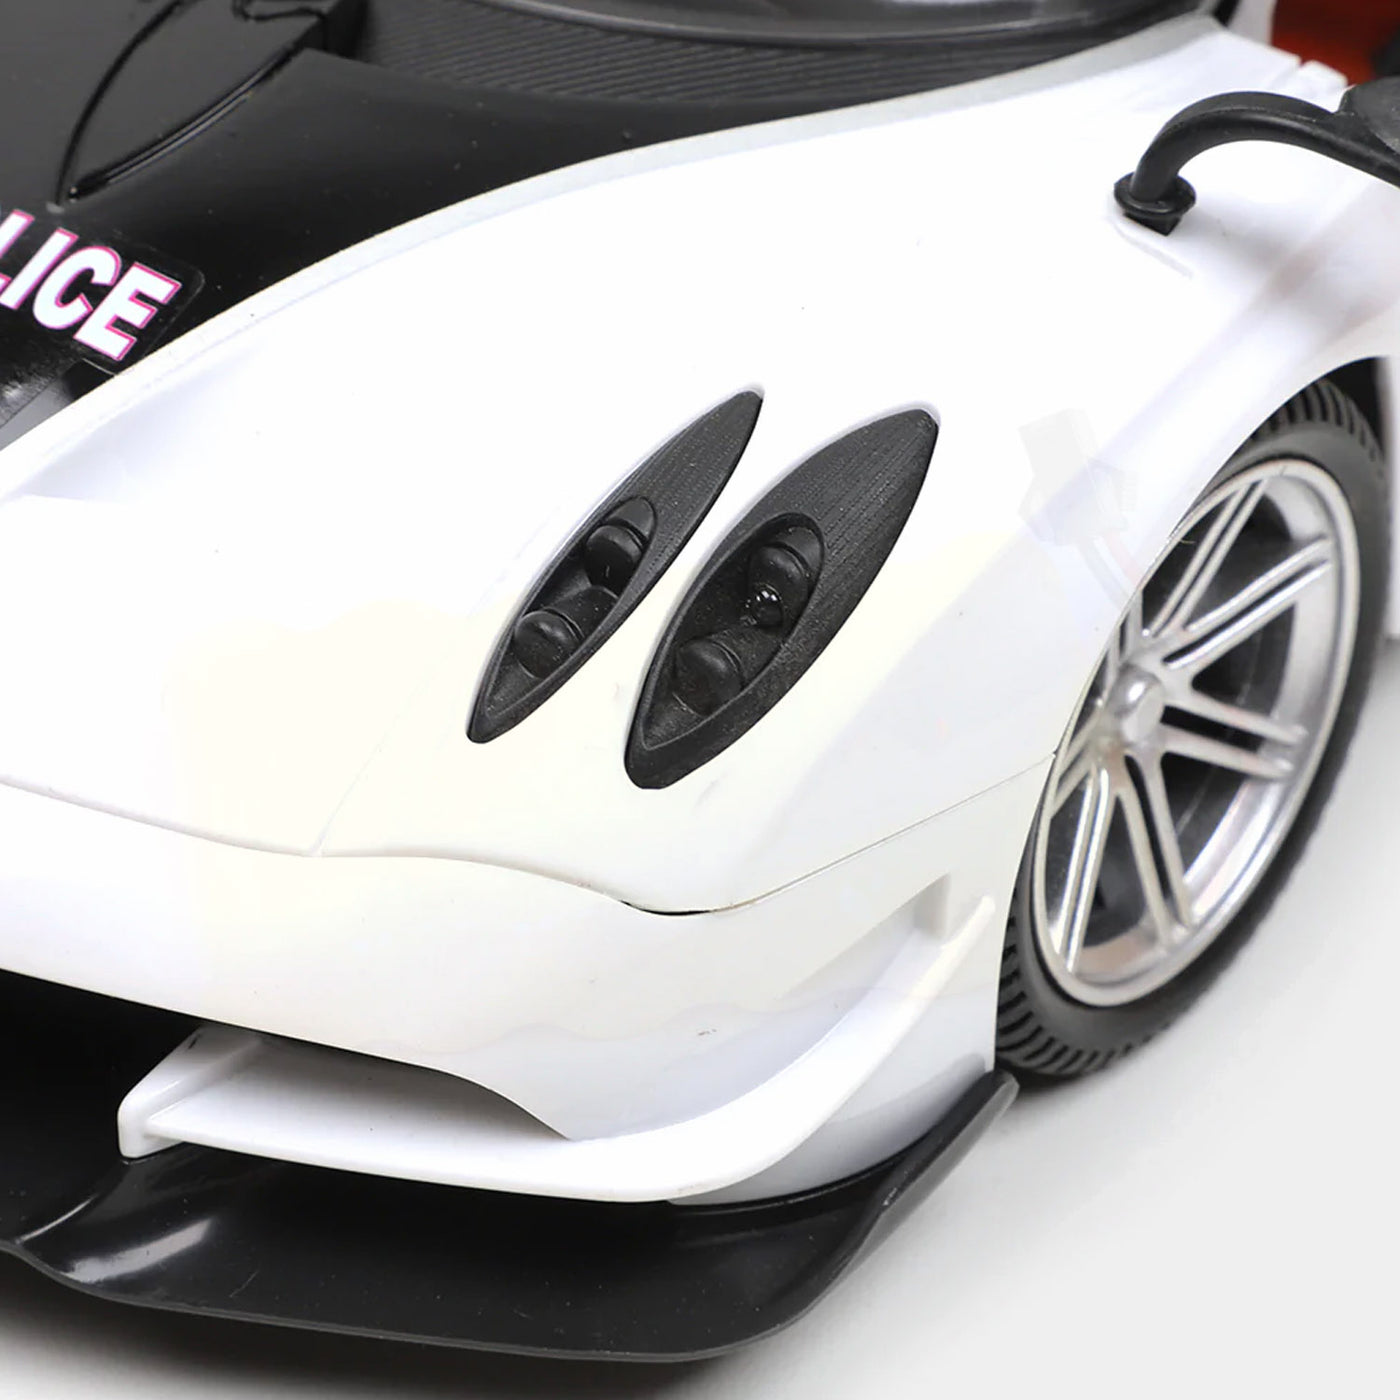 Speed Remote Control Car R/C For kids - White